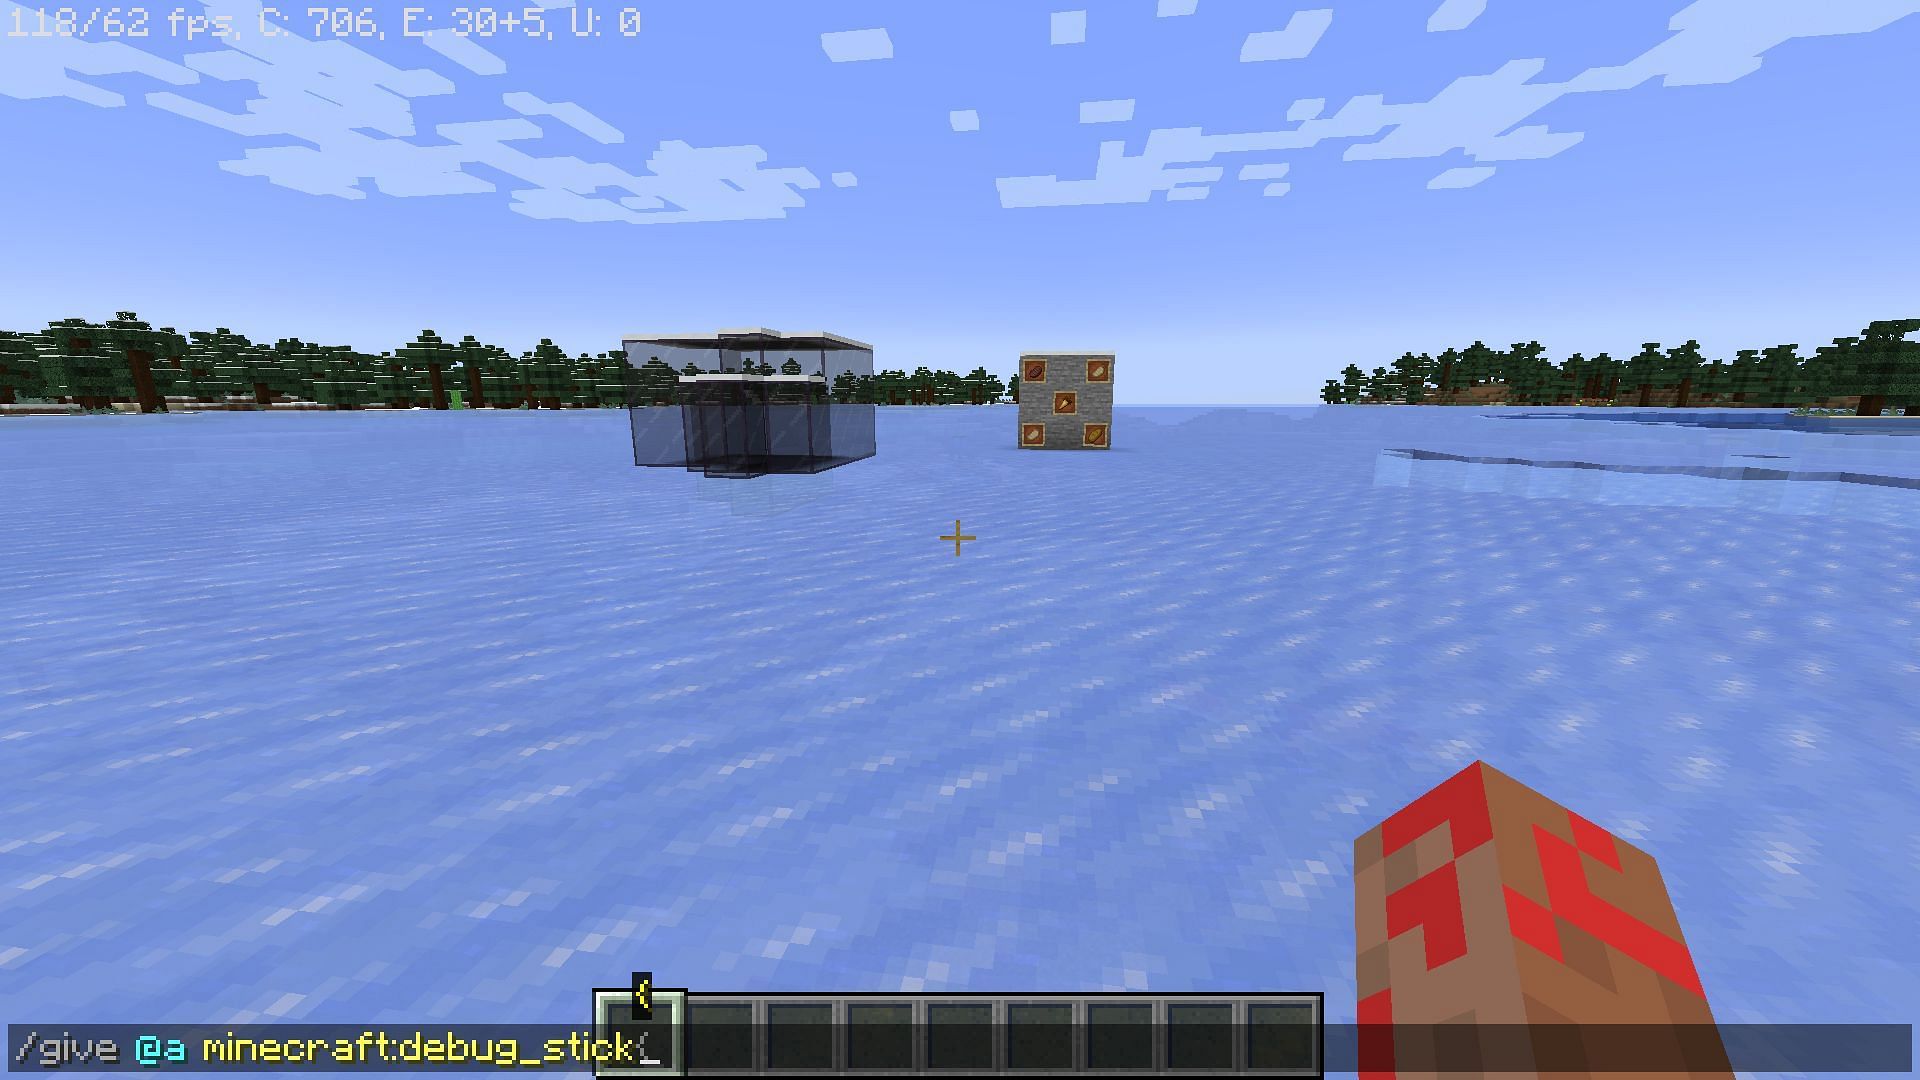 The command used to get the stick (Image via Minecraft)